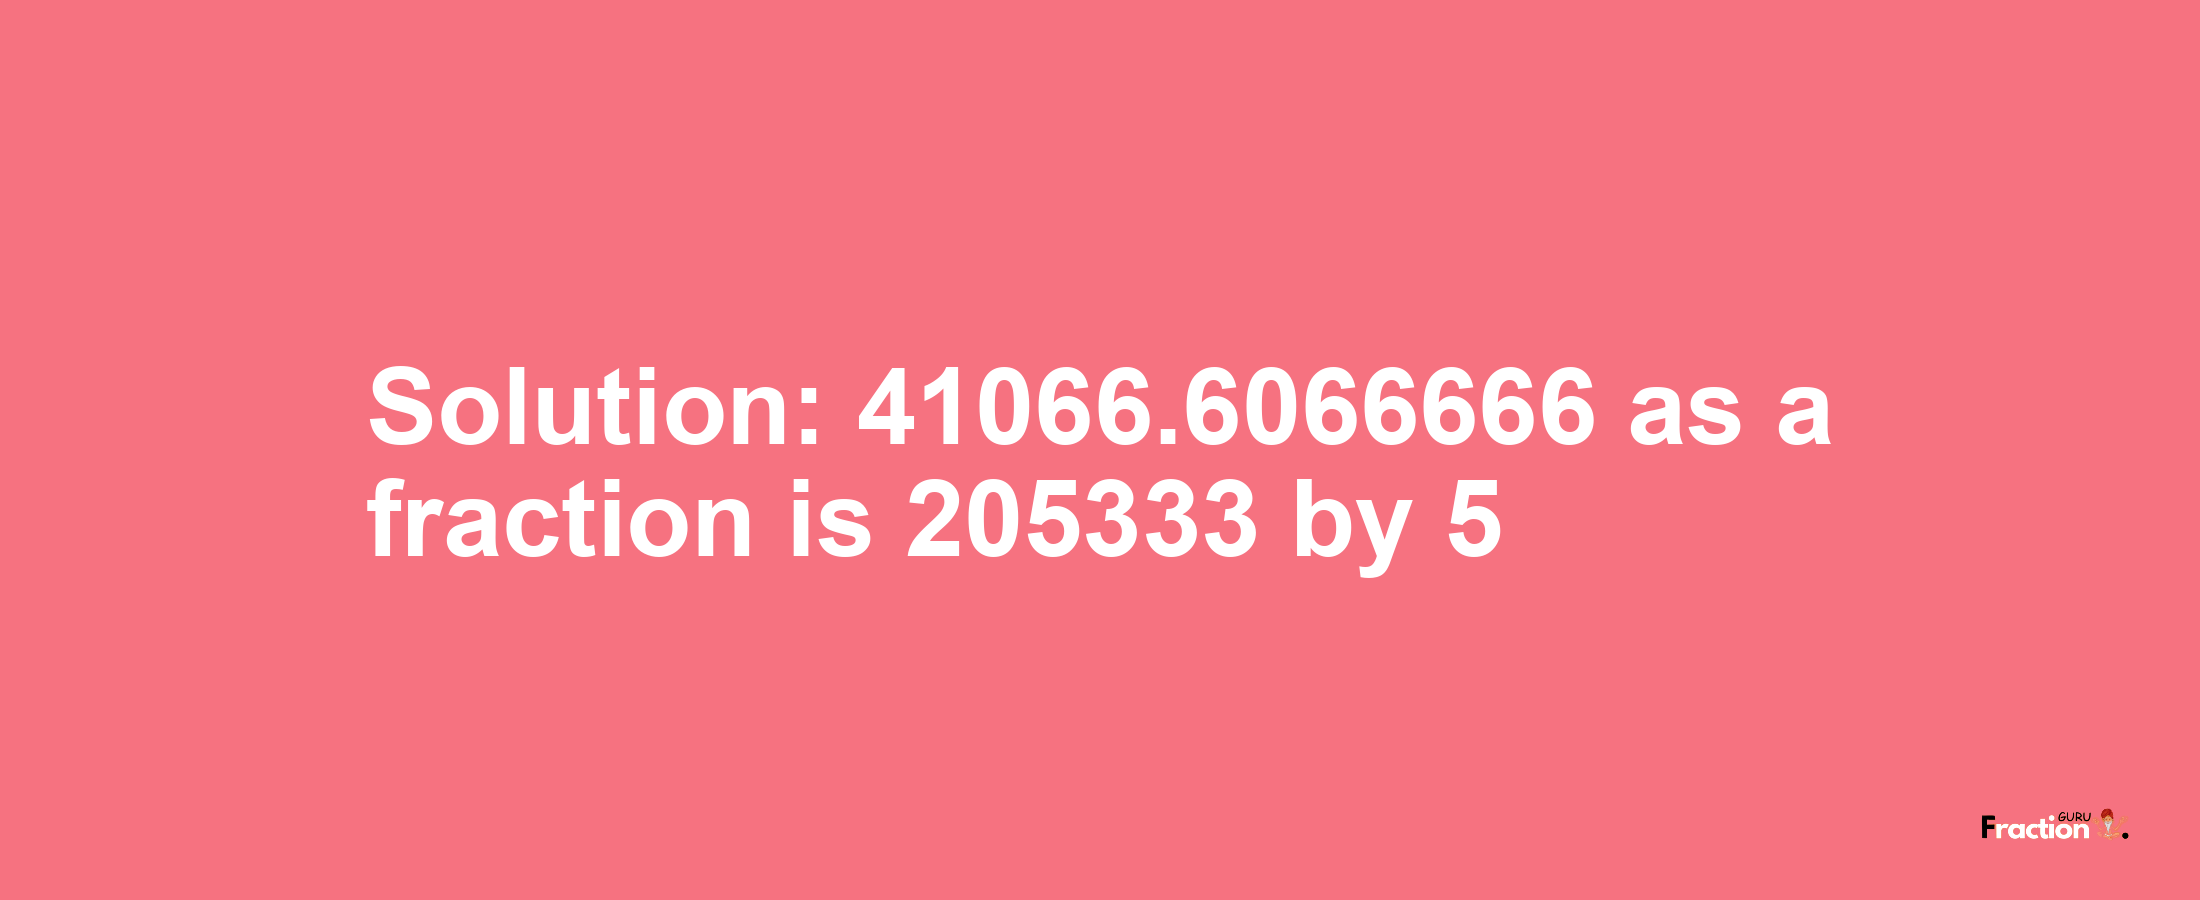 Solution:41066.6066666 as a fraction is 205333/5